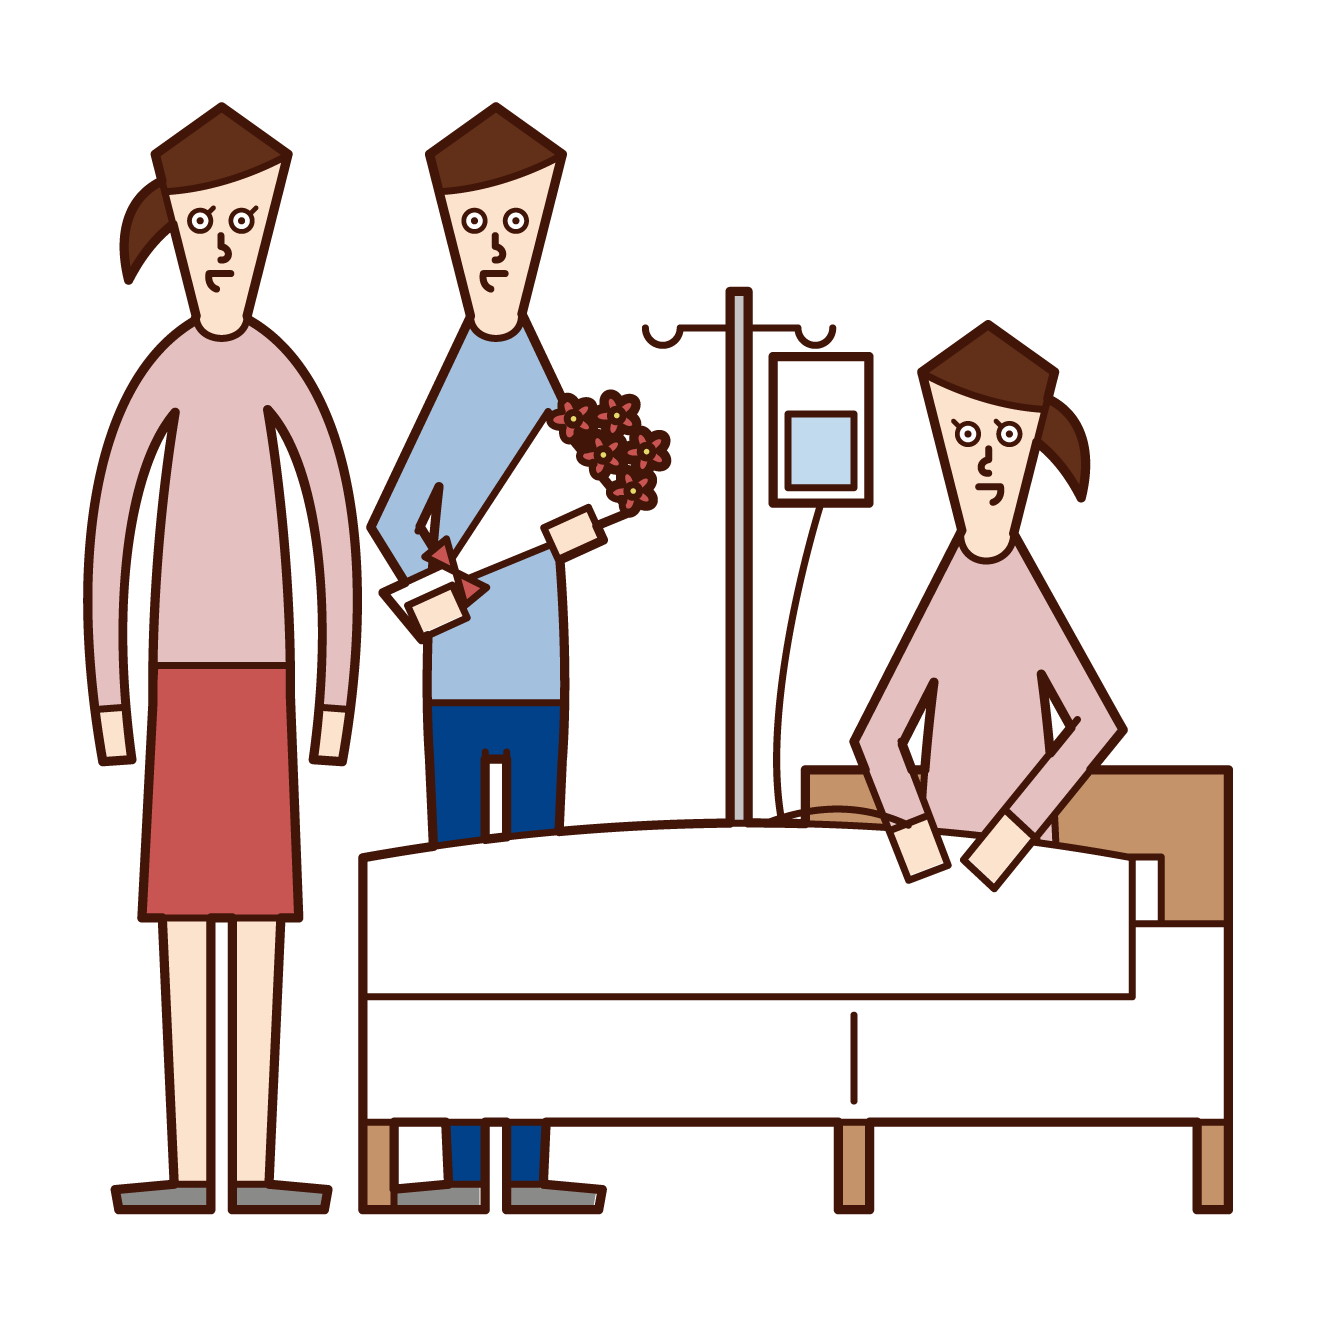 Illustration of a friend couple visiting a hospitalized man